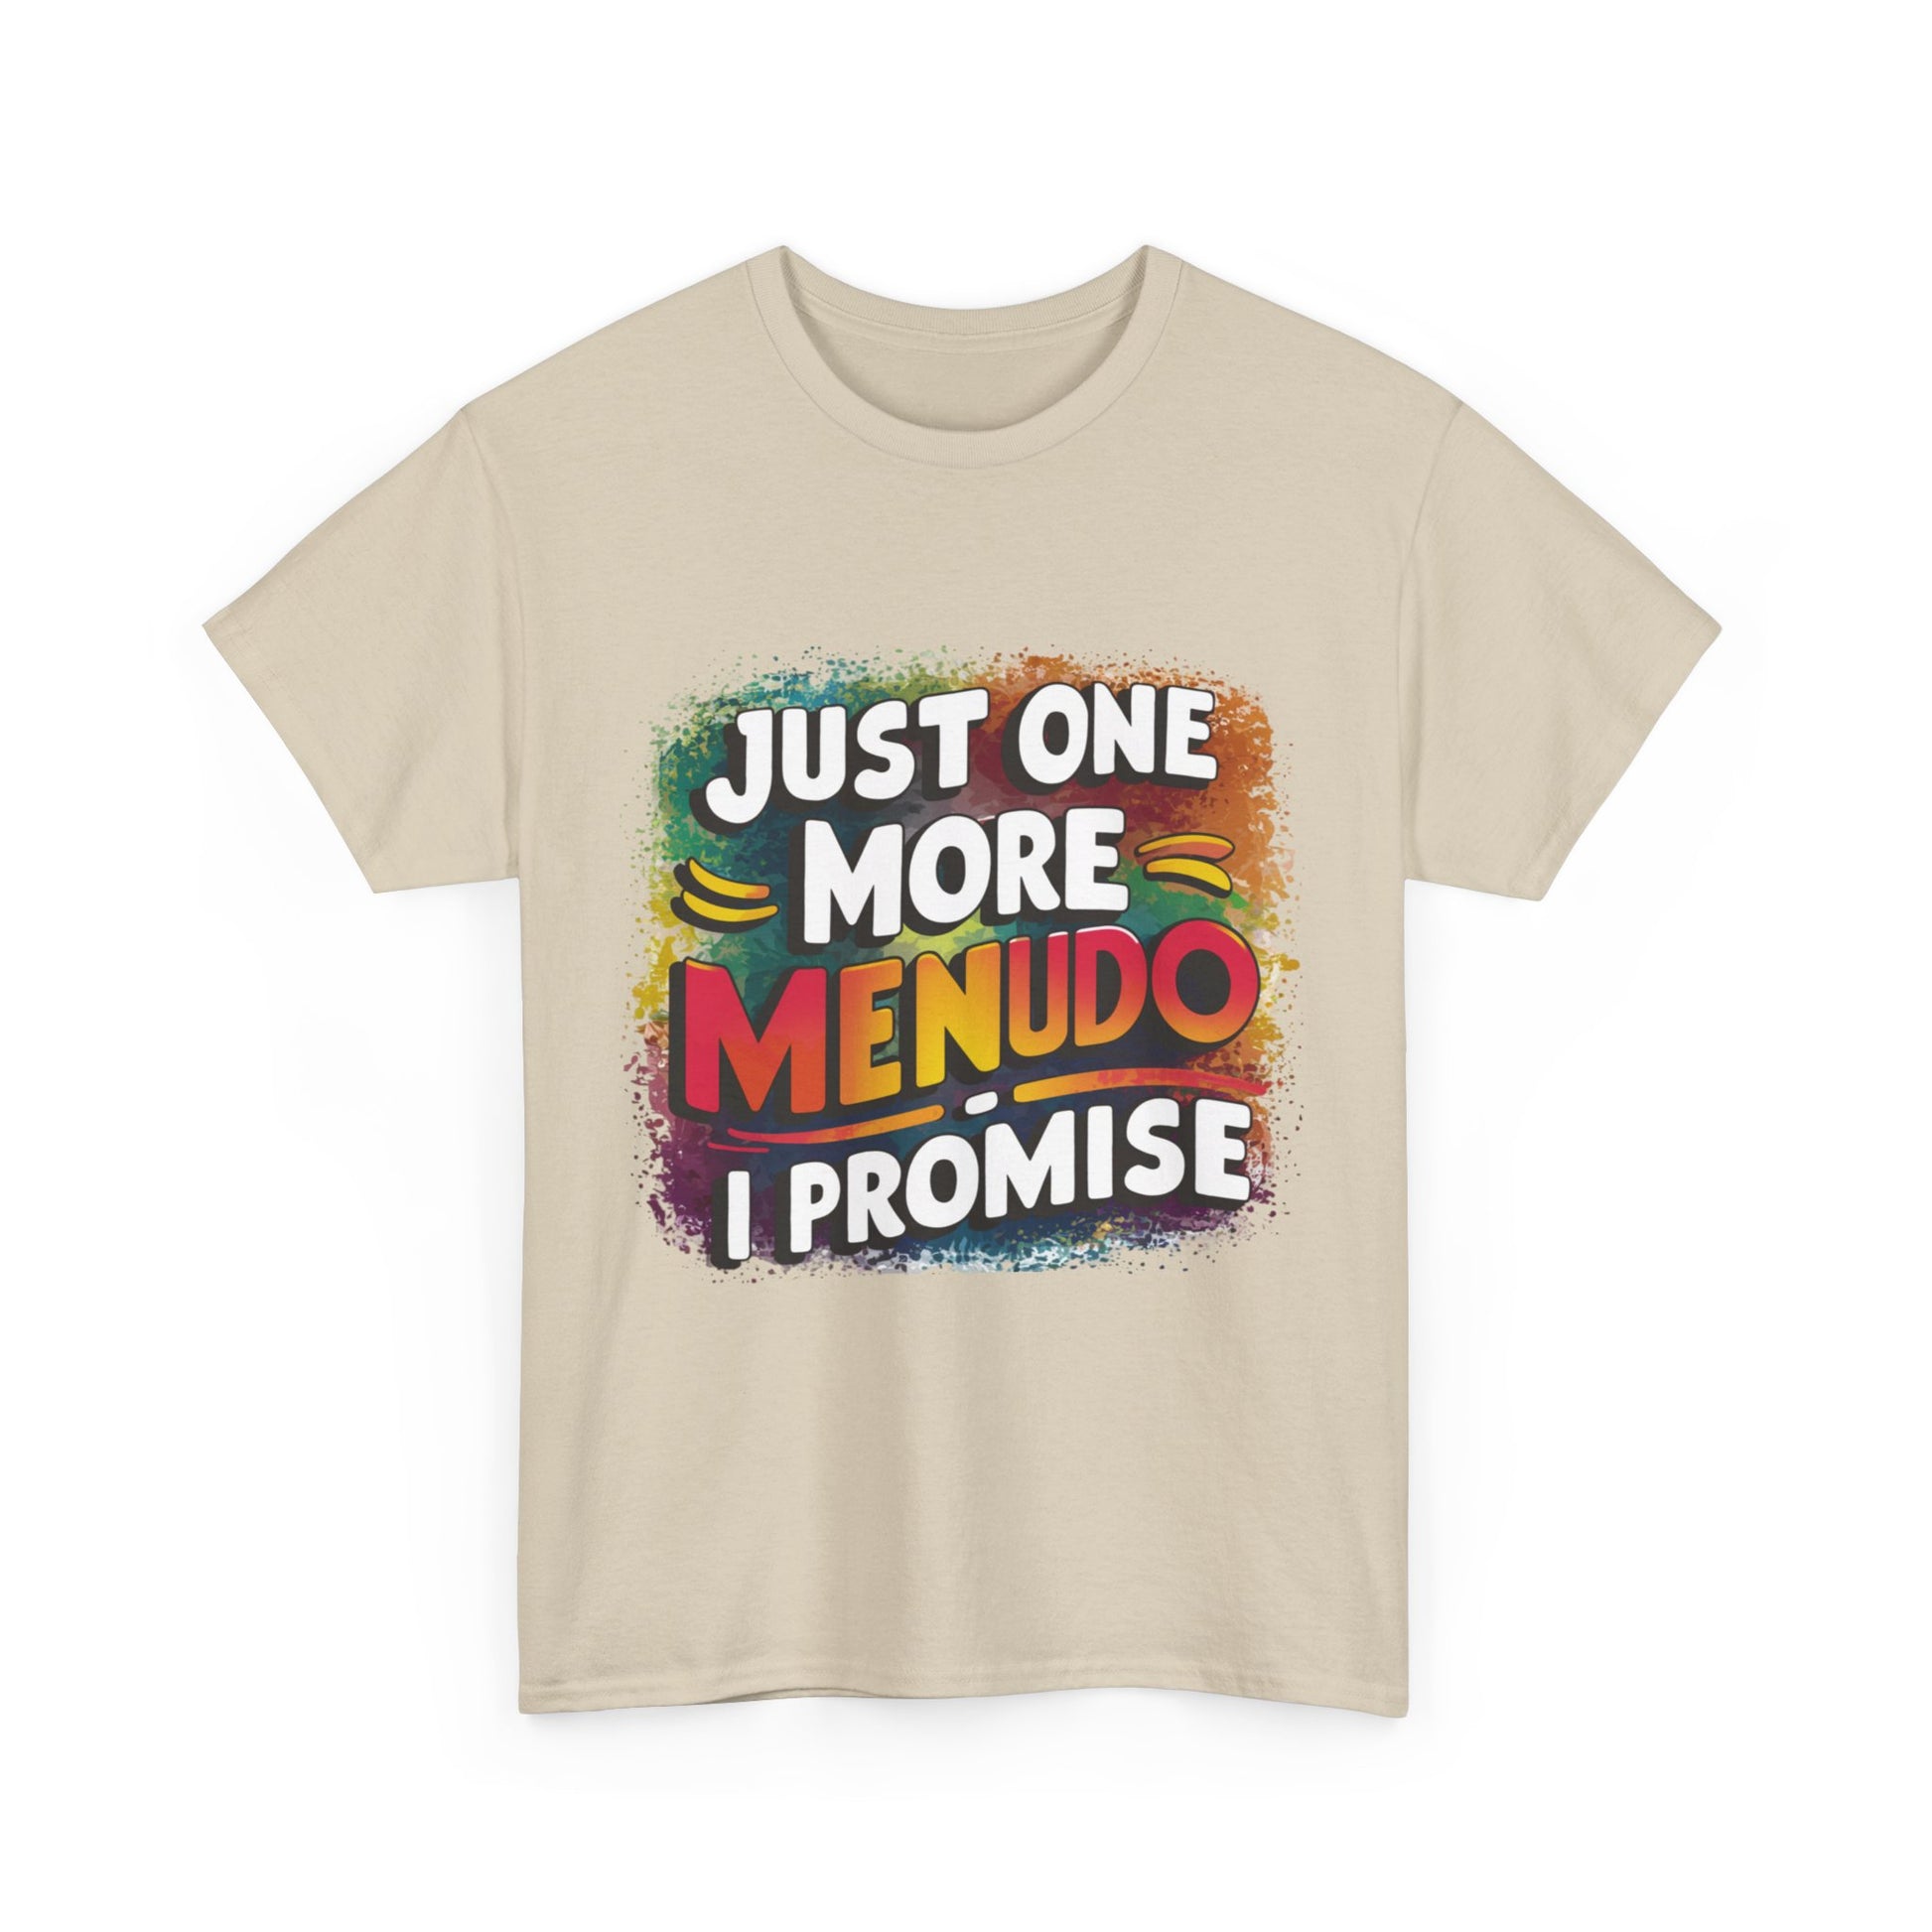 Just One More Menudo I Promise Mexican Food Graphic Unisex Heavy Cotton Tee Cotton Funny Humorous Graphic Soft Premium Unisex Men Women Sand T-shirt Birthday Gift-36